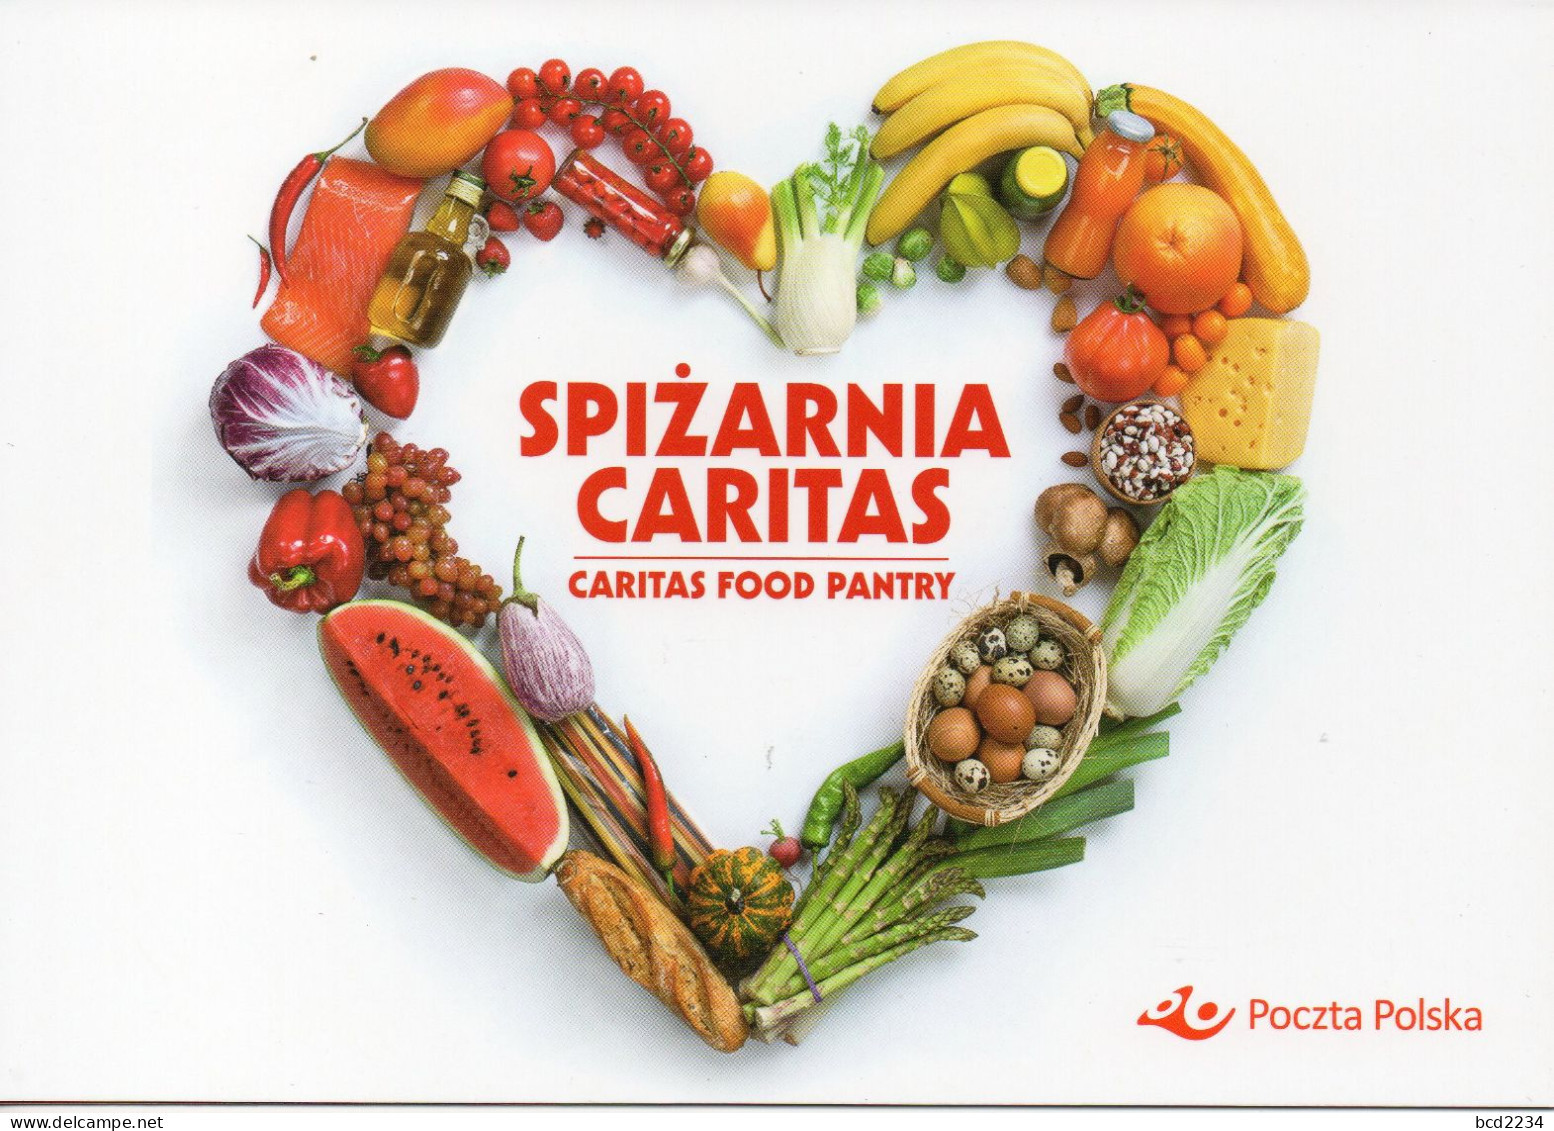 POLAND 2023 POST LIMITED EDITION PHILATELIC FOLDER: CARITAS FOOD PANTRY CHARITY DON'T WASTE FOOD CHANGE YOUR WAYS - Briefe U. Dokumente